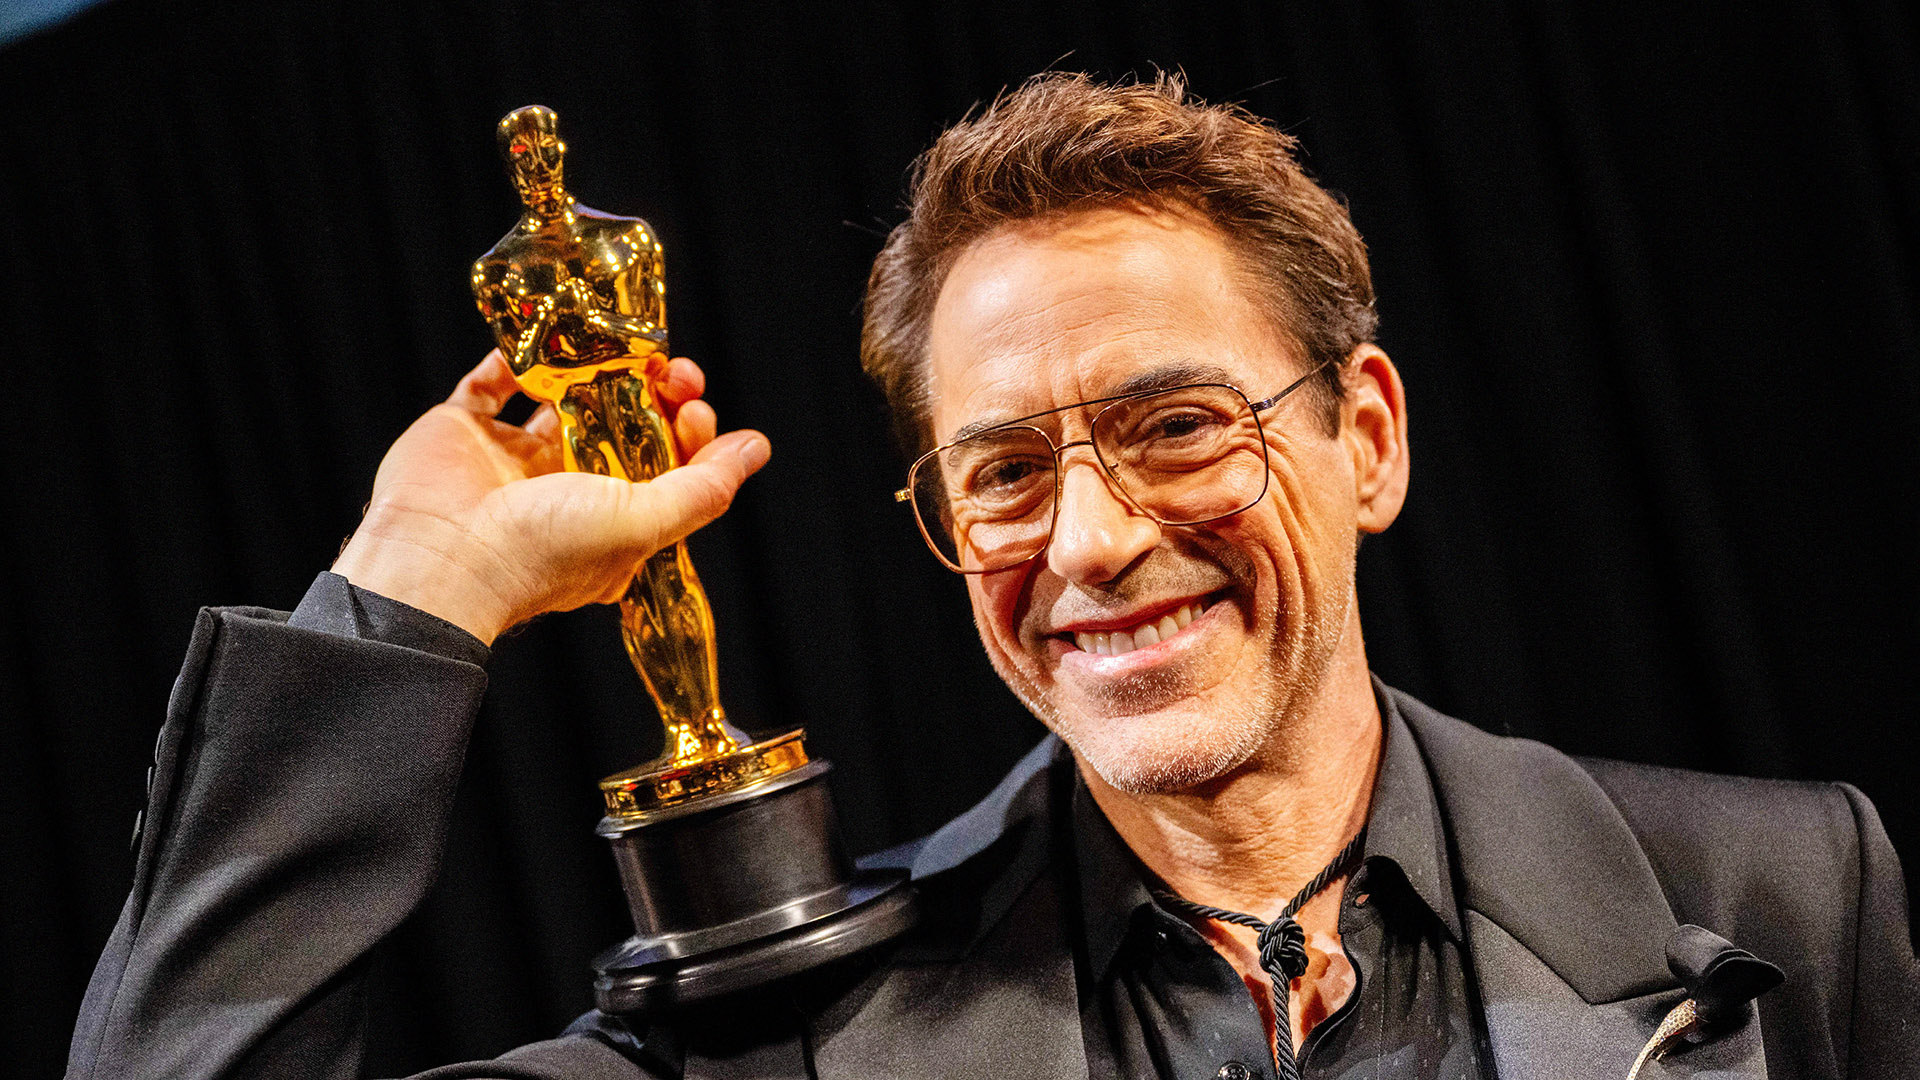 What's Next for Robert Downey Jr. After Winning an Oscar? The Actor Weighs In